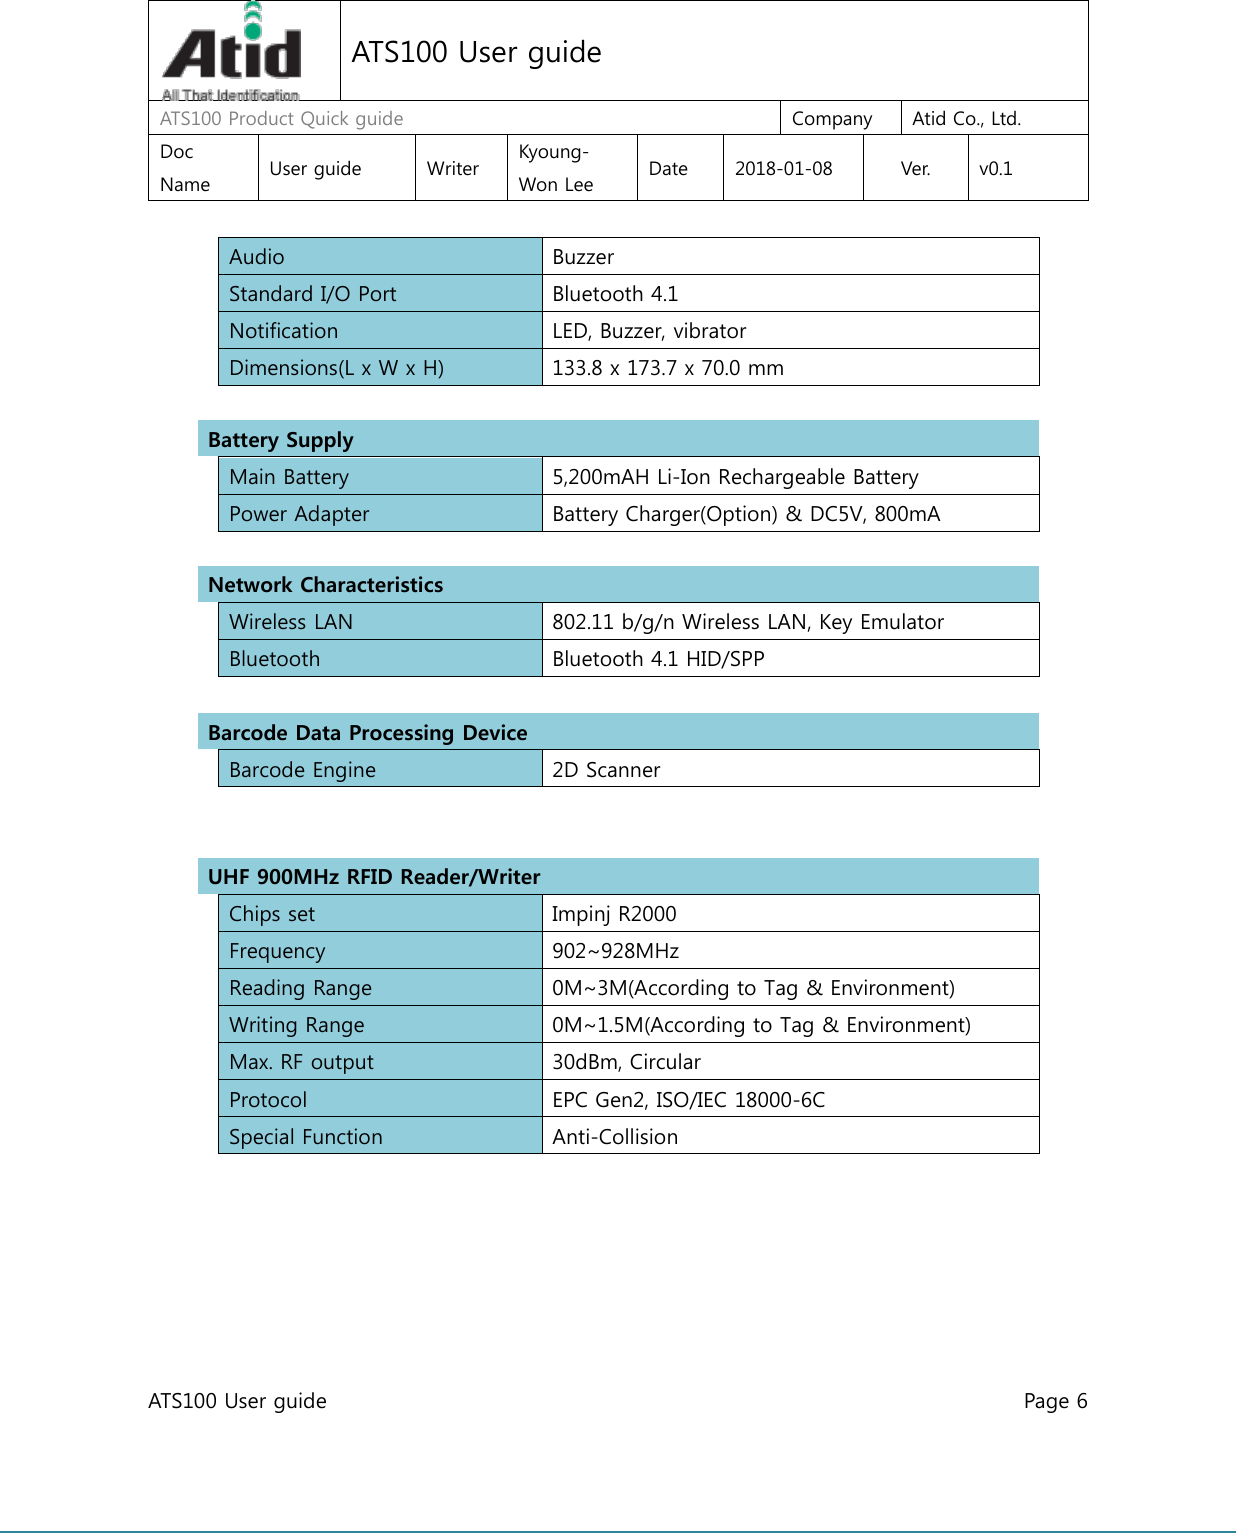  ATS100 User guide    Page 6      ATS100 User guide ATS100 Product Quick guide  Company  Atid Co., Ltd. Doc Name  User guide  Writer  Kyoung-Won Lee  Date  2018-01-08  Ver.  v0.1  Audio  Buzzer  Standard I/O Port  Bluetooth 4.1  Notification  LED, Buzzer, vibrator  Dimensions(L x W x H)  133.8 x 173.7 x 70.0 mm     Battery Supply      Main Battery  5,200mAH Li-Ion Rechargeable Battery  Power Adapter  Battery Charger(Option) &amp; DC5V, 800mA     Network Characteristics      Wireless LAN  802.11 b/g/n Wireless LAN, Key Emulator   Bluetooth  Bluetooth 4.1 HID/SPP  Barcode Data Processing Device      Barcode Engine  2D Scanner         UHF 900MHz RFID Reader/Writer   Chips set  Impinj R2000  Frequency  902~928MHz   Reading Range  0M~3M(According to Tag &amp; Environment)  Writing Range  0M~1.5M(According to Tag &amp; Environment)  Max. RF output  30dBm, Circular  Protocol  EPC Gen2, ISO/IEC 18000-6C  Special Function  Anti-Collision      